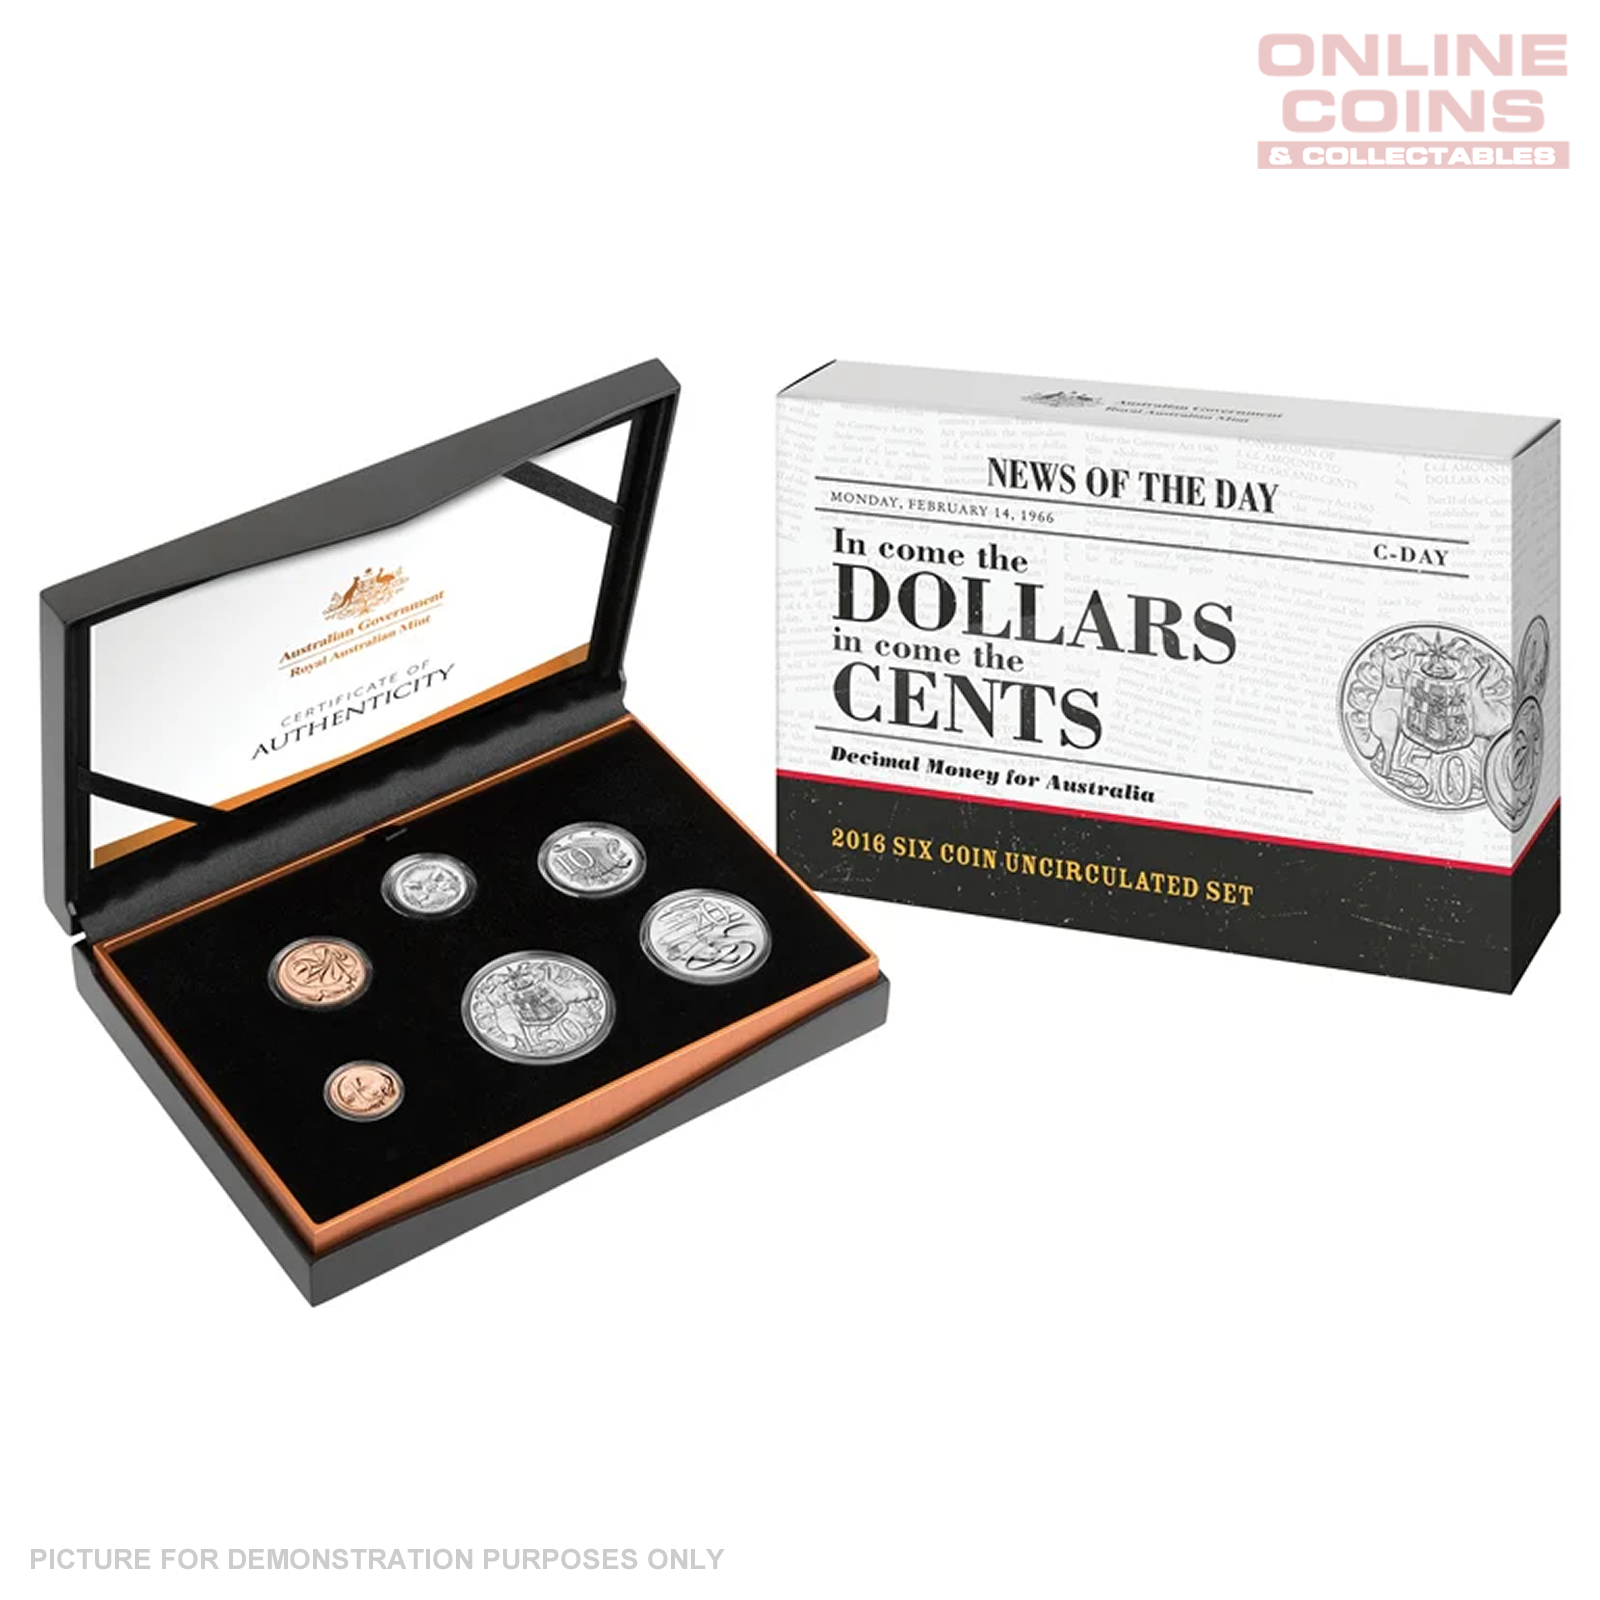 2016 Uncirculated 6 coin set - 'In come the dollars, in come the cents: Decimal Money for Australia'